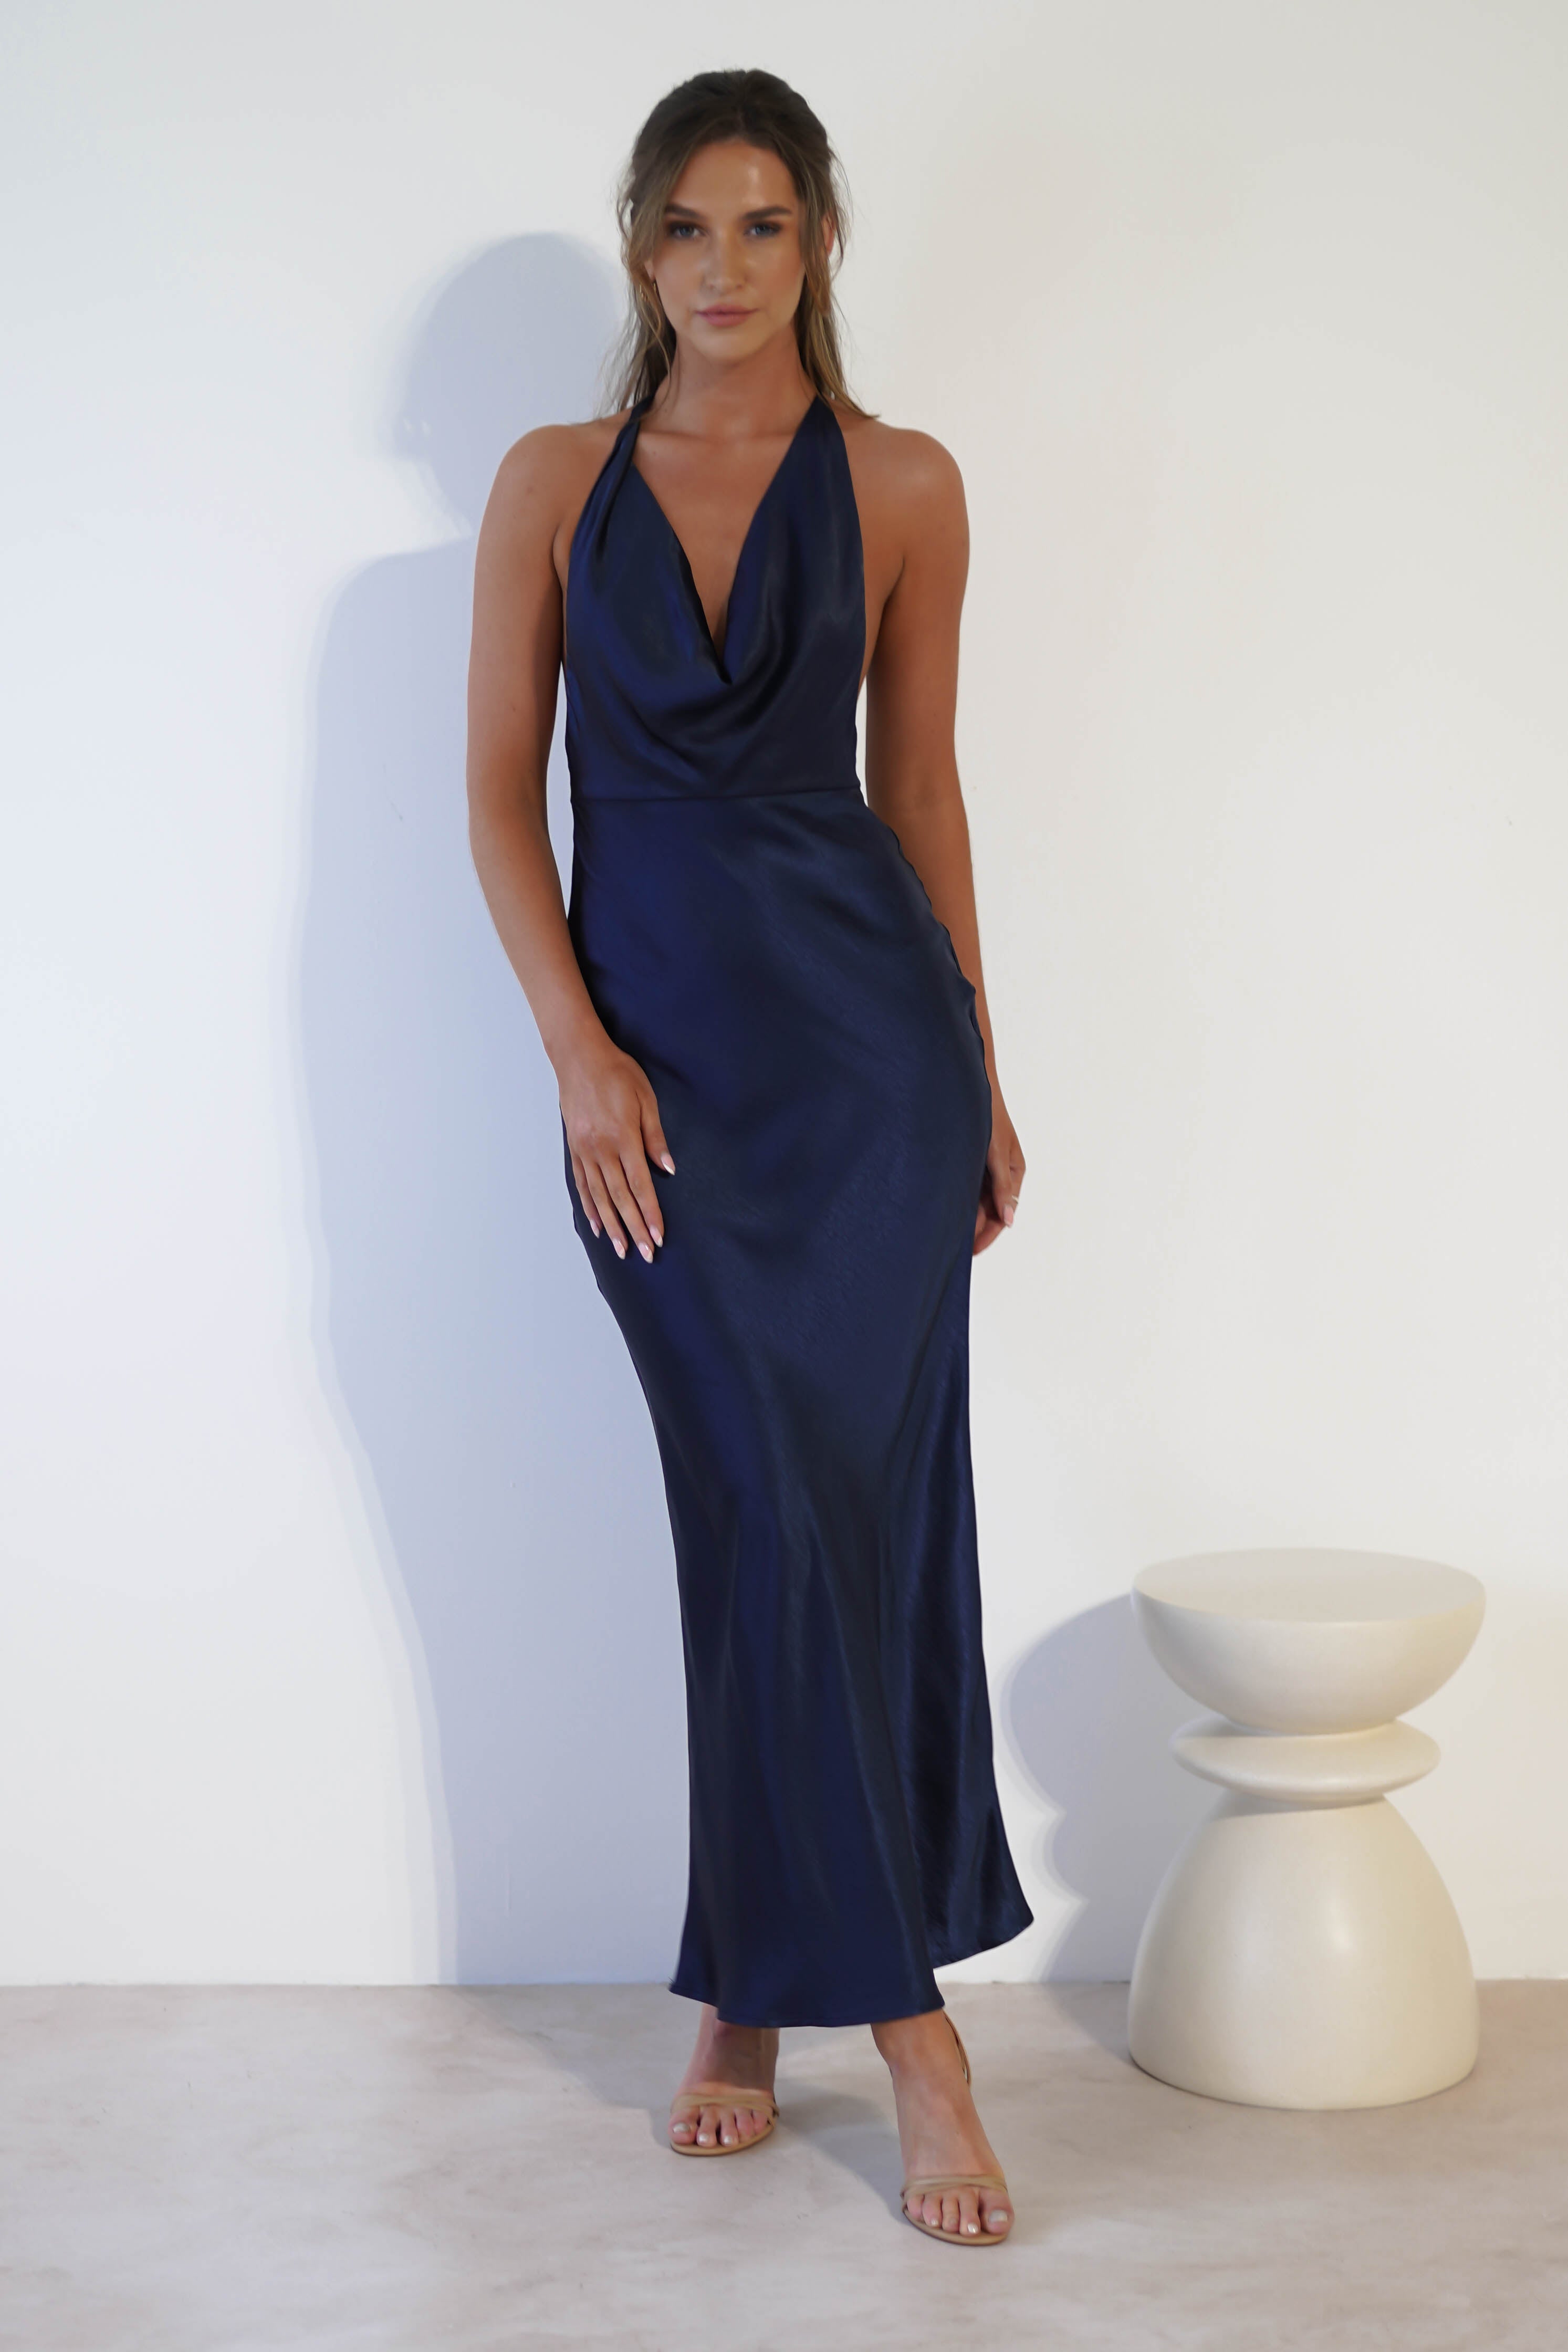 Trendy Navy Dresses - Fast Delivery for All Events – Oh Hello Clothing